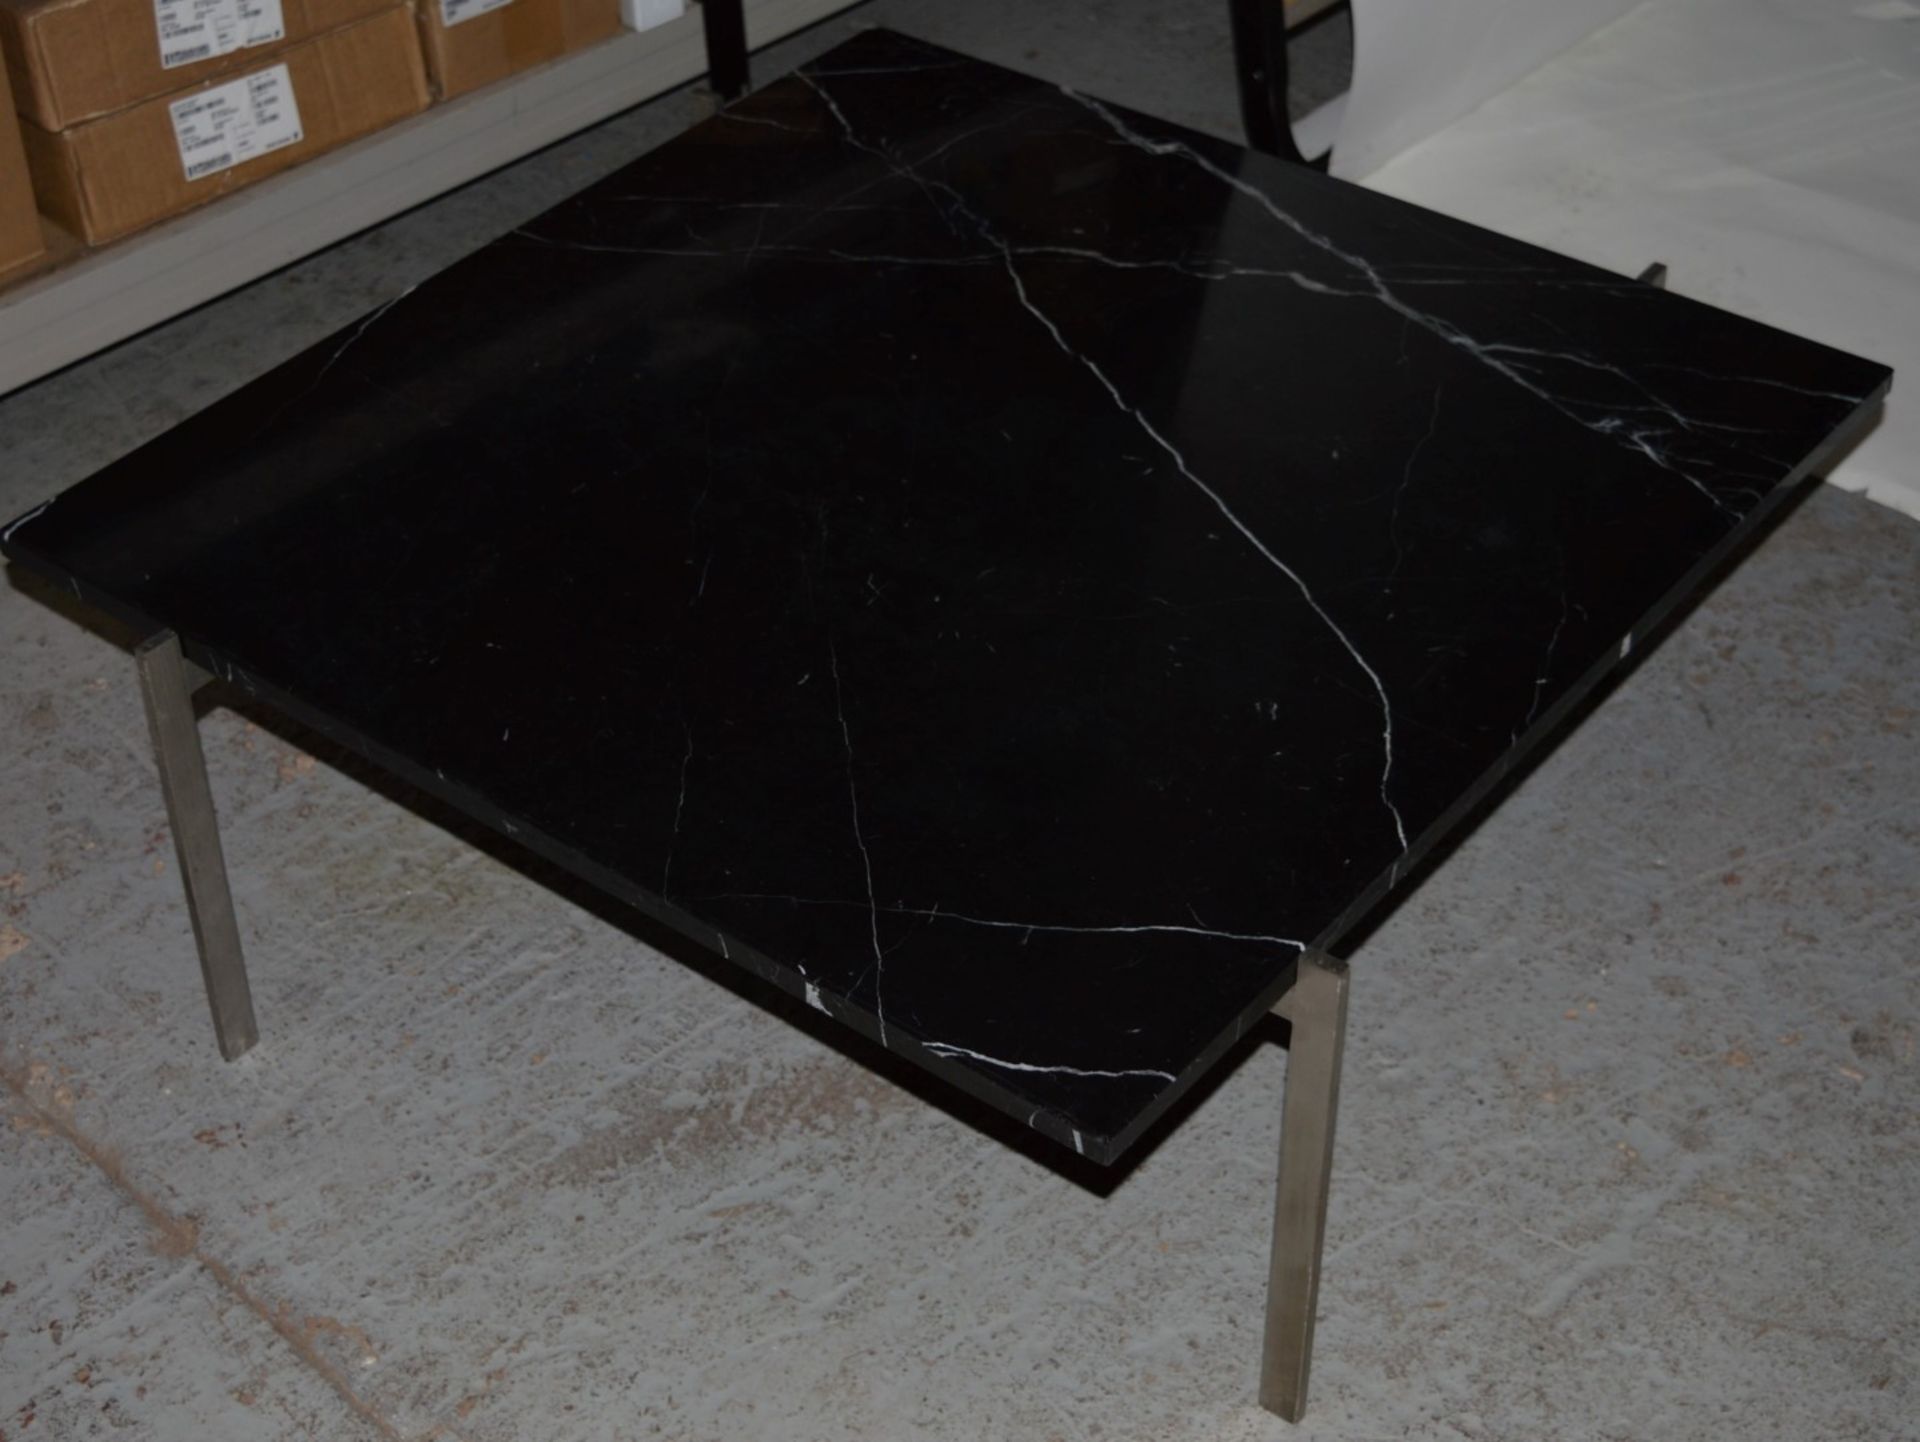 1 x Contemporary Faux Marble Coffee Table With Satin Chrome Frame - Black Faux Marble Full of